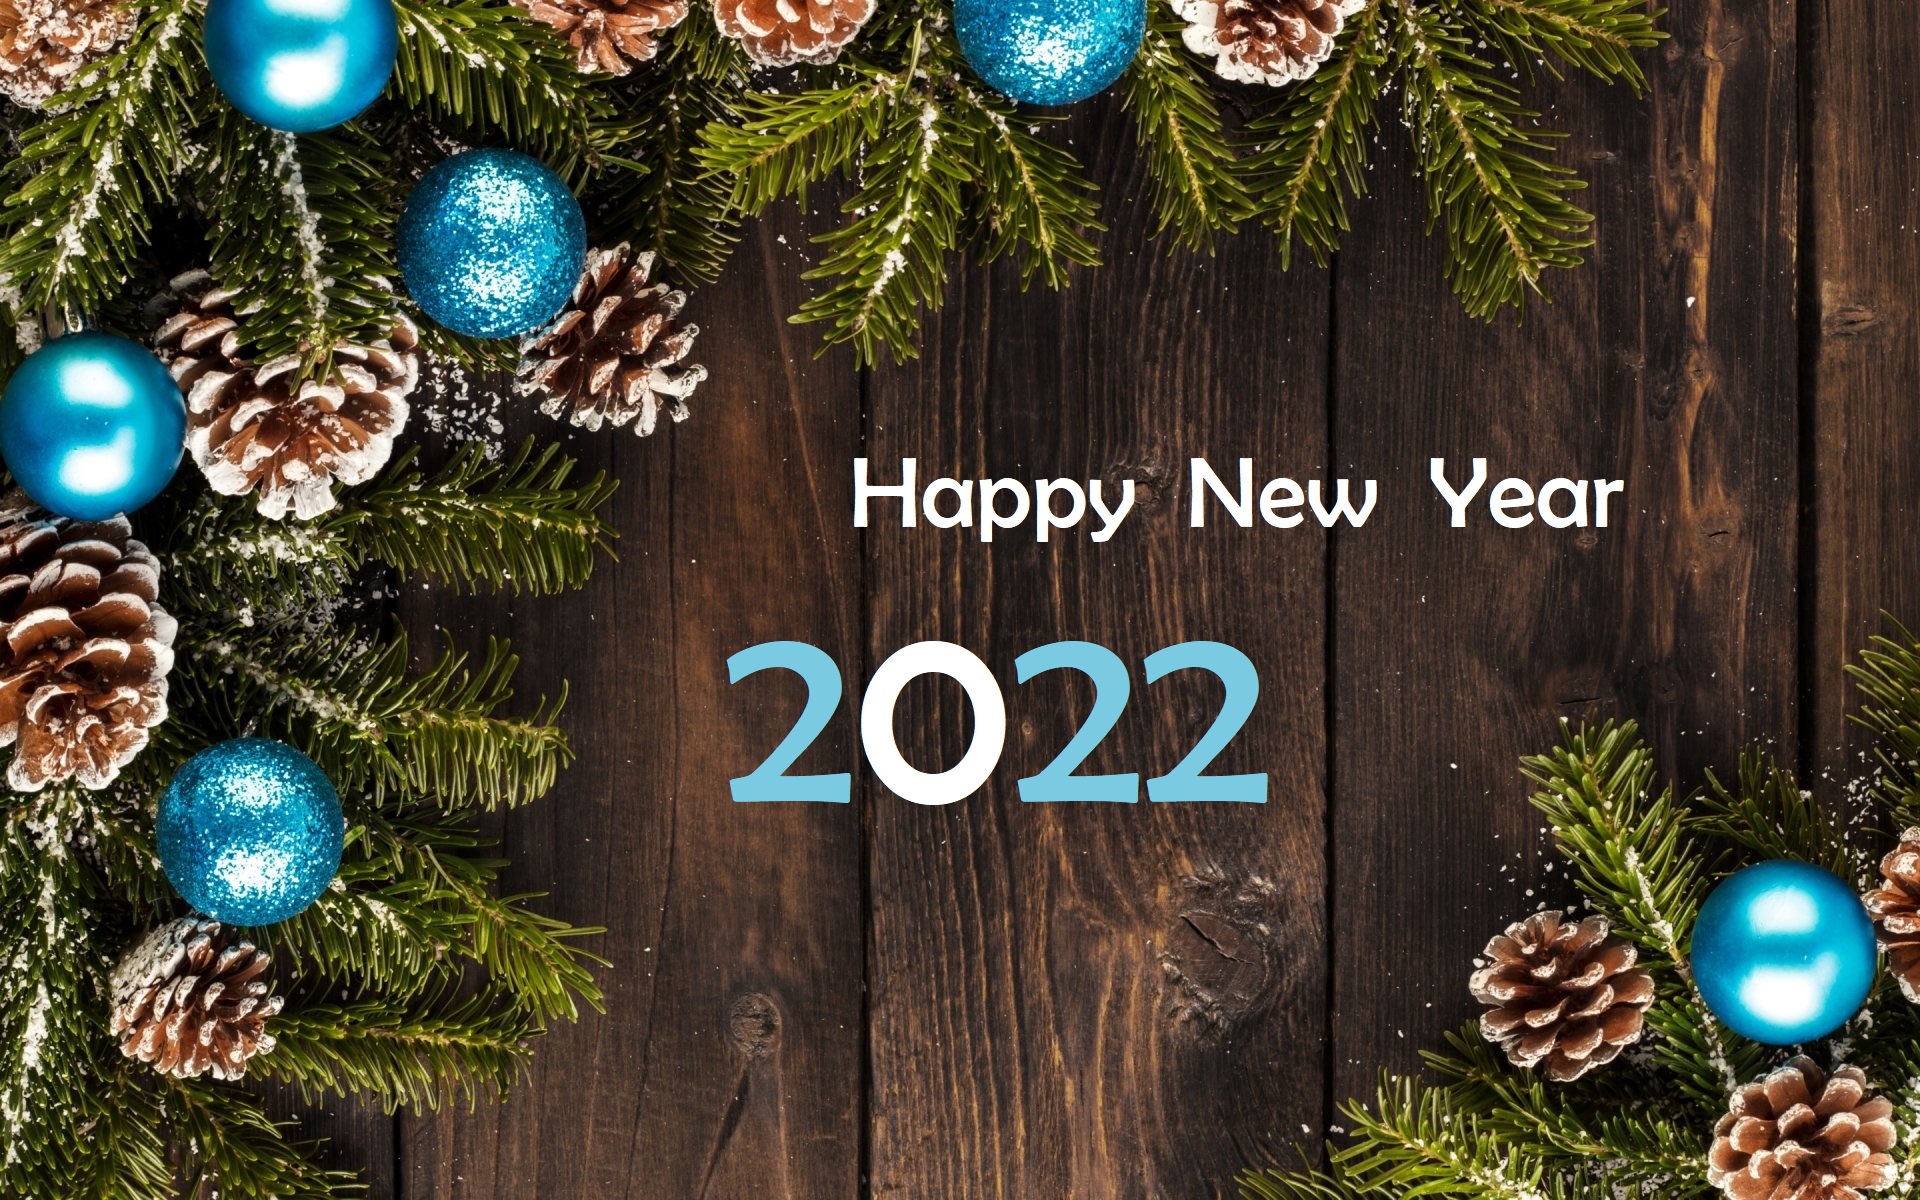 holiday, new year 2022, christmas ornaments, happy new year download HD wallpaper